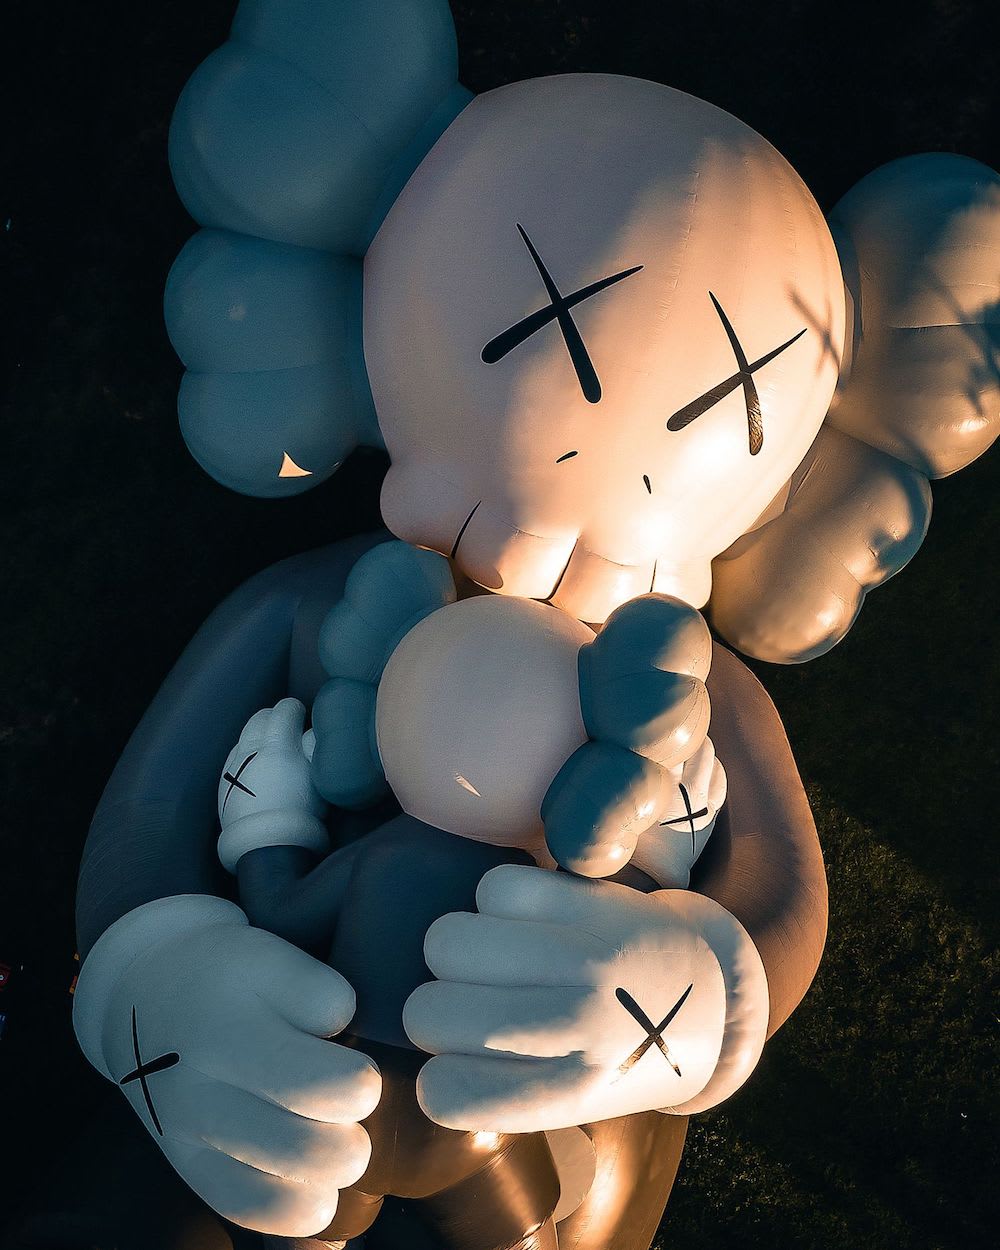 KAWS: HOLIDAY Sculpture is Headed to Singapore